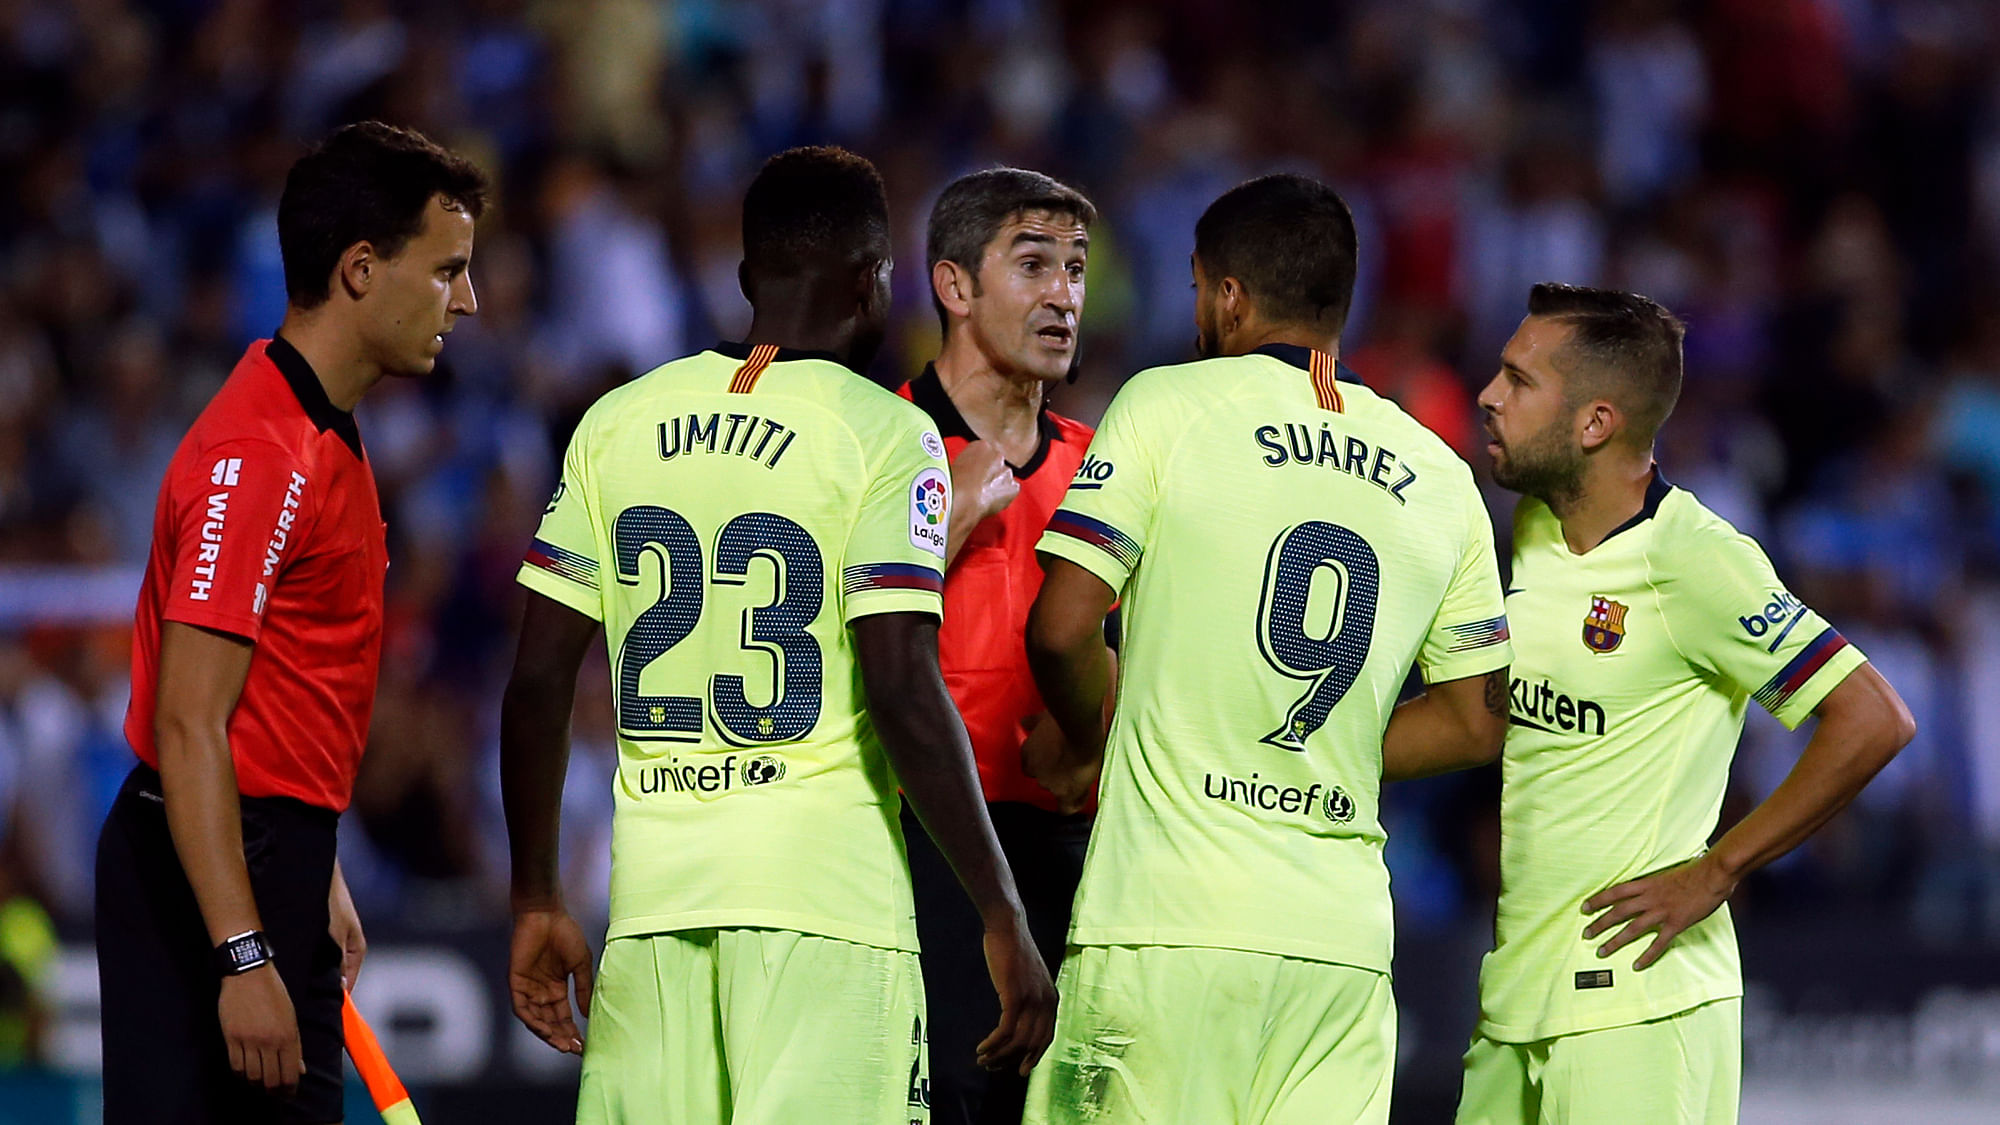 FC Barcelona´s Luis Suarez, second right, argues with referee Undiano Mallenco, center, during the Spanish La Liga soccer match between Leganes and FC Barcelona at the Butarque stadium in Leganes, Spain, Wednesday, Sept. 26, 2018.